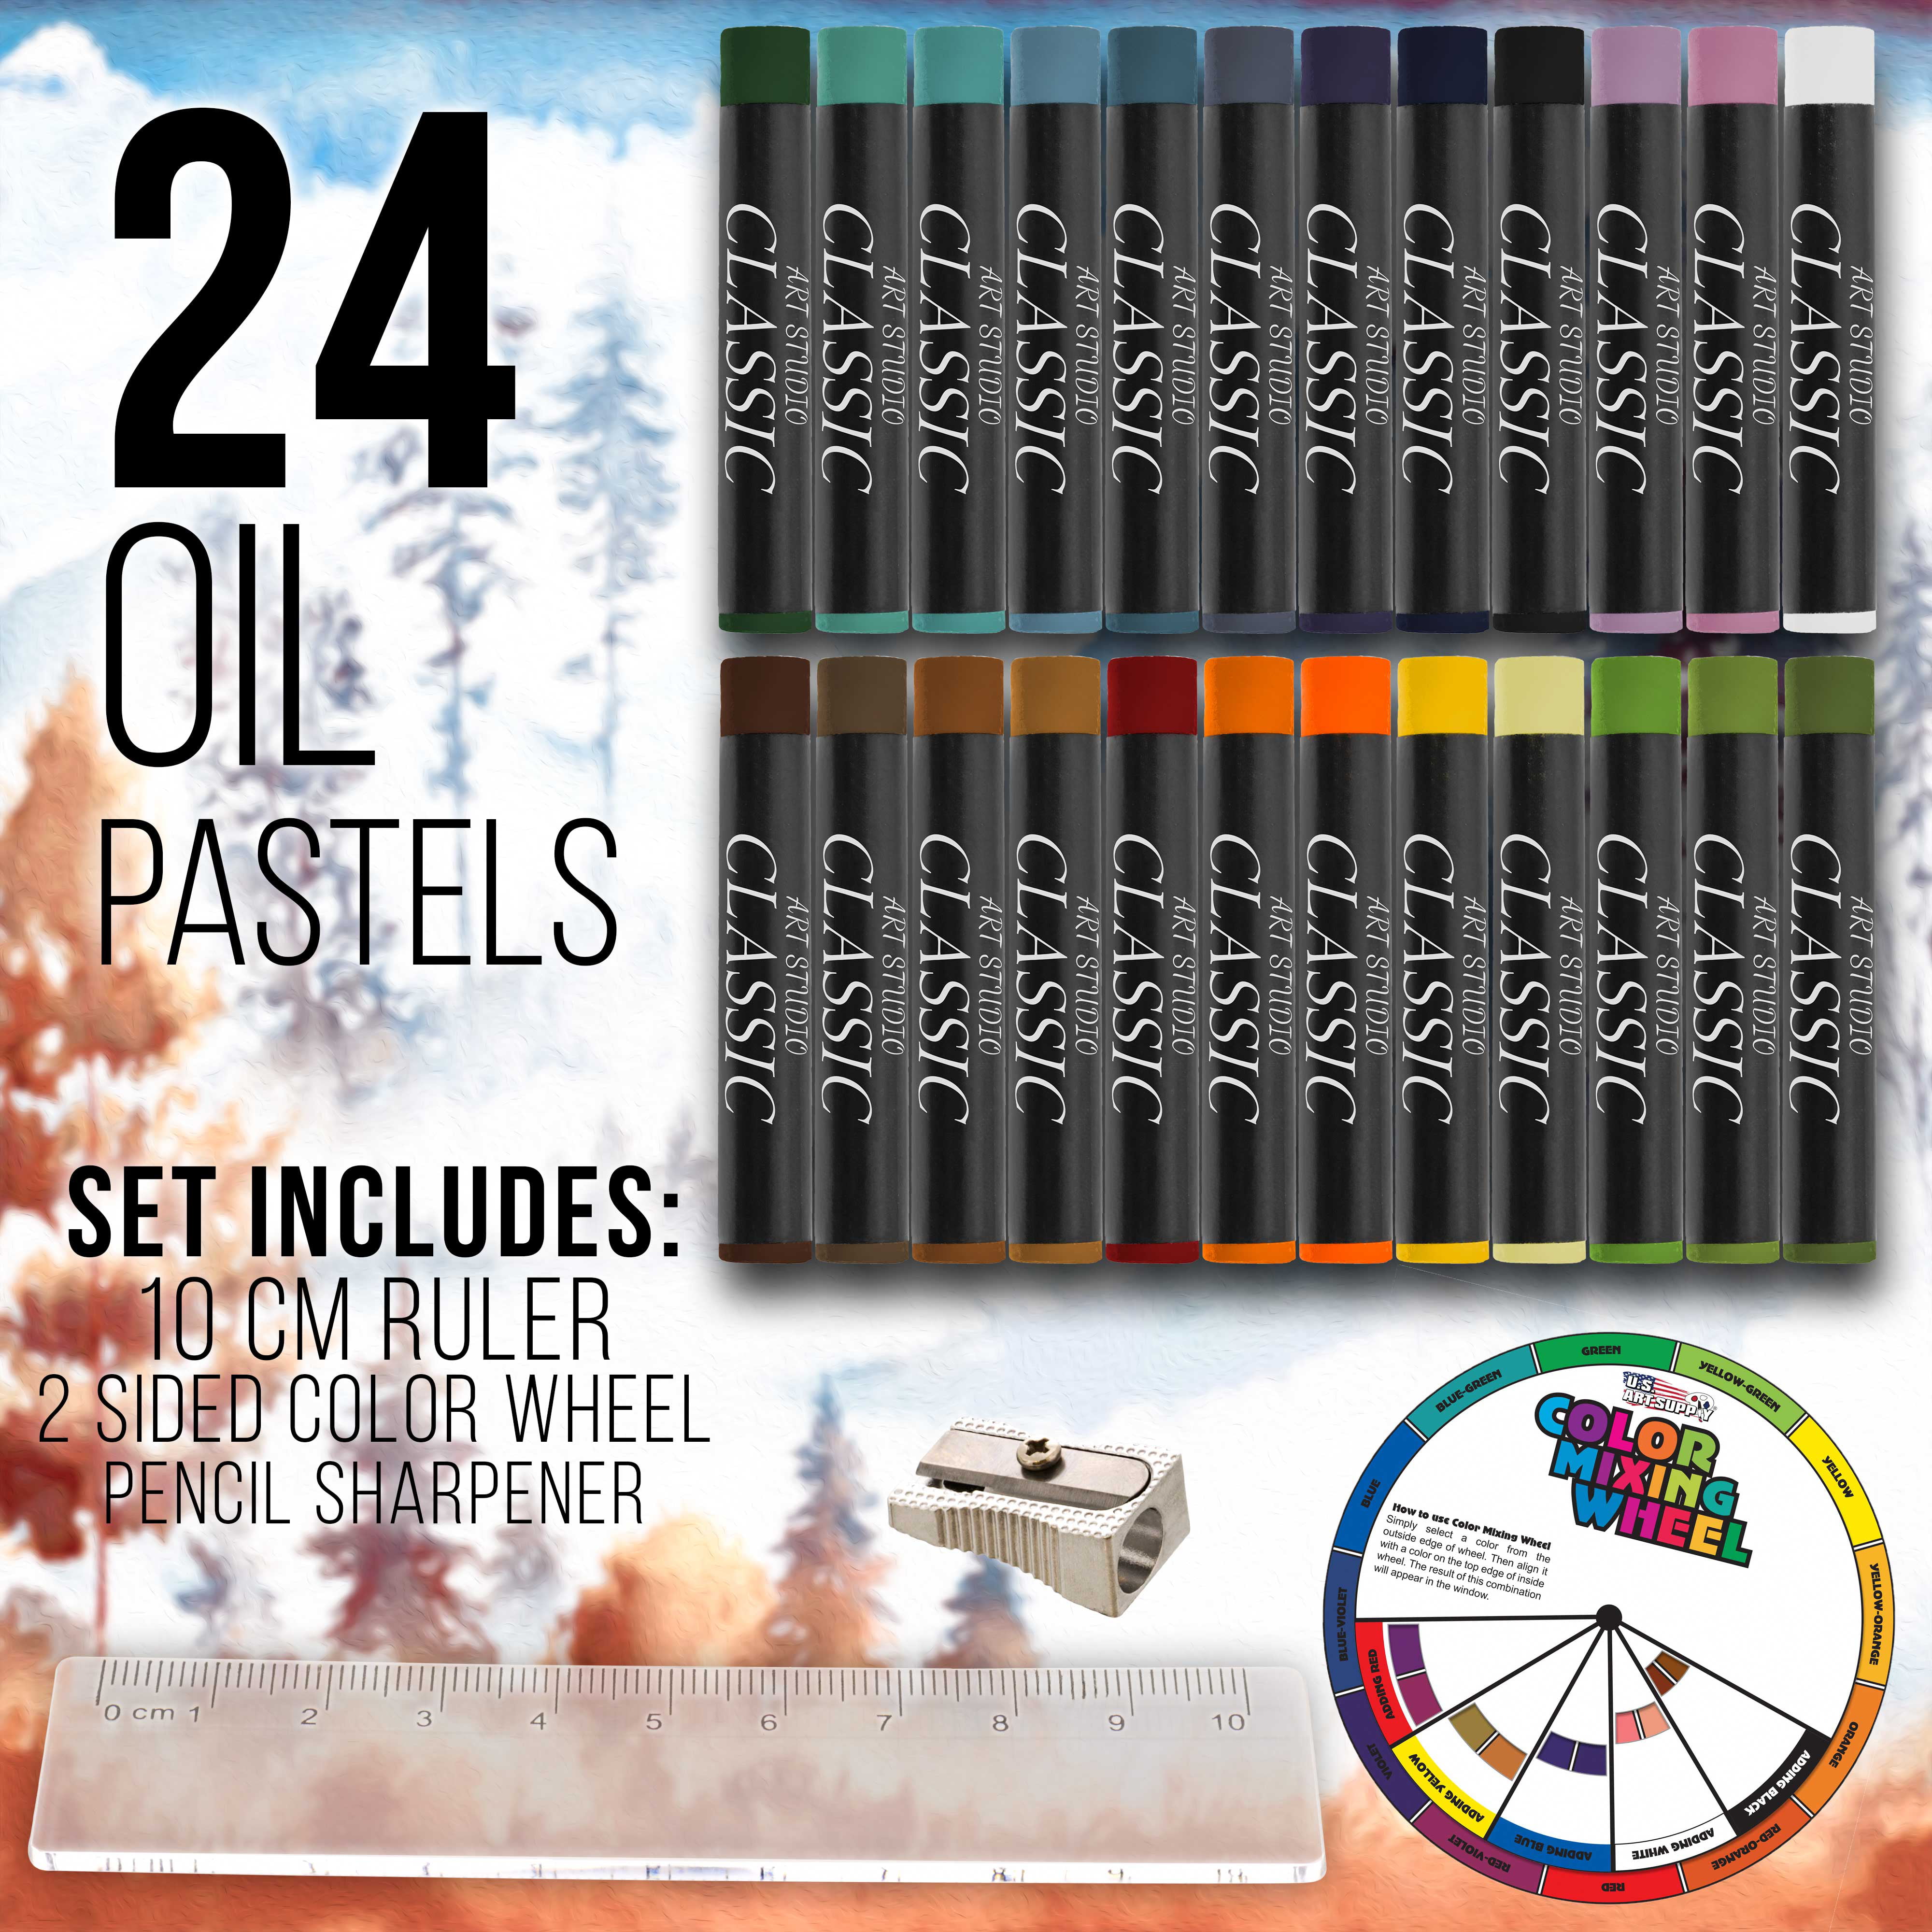 U.S. Art Supply 145-Piece Mega Wood Box Art Painting and Drawing Set in  Storage Case - 2 Sketch Pads 24 Watercolor Paint Colors 24 Oil Pastels 24  Colored Pencils 60 Crayons 2 Brushes Artist Kit